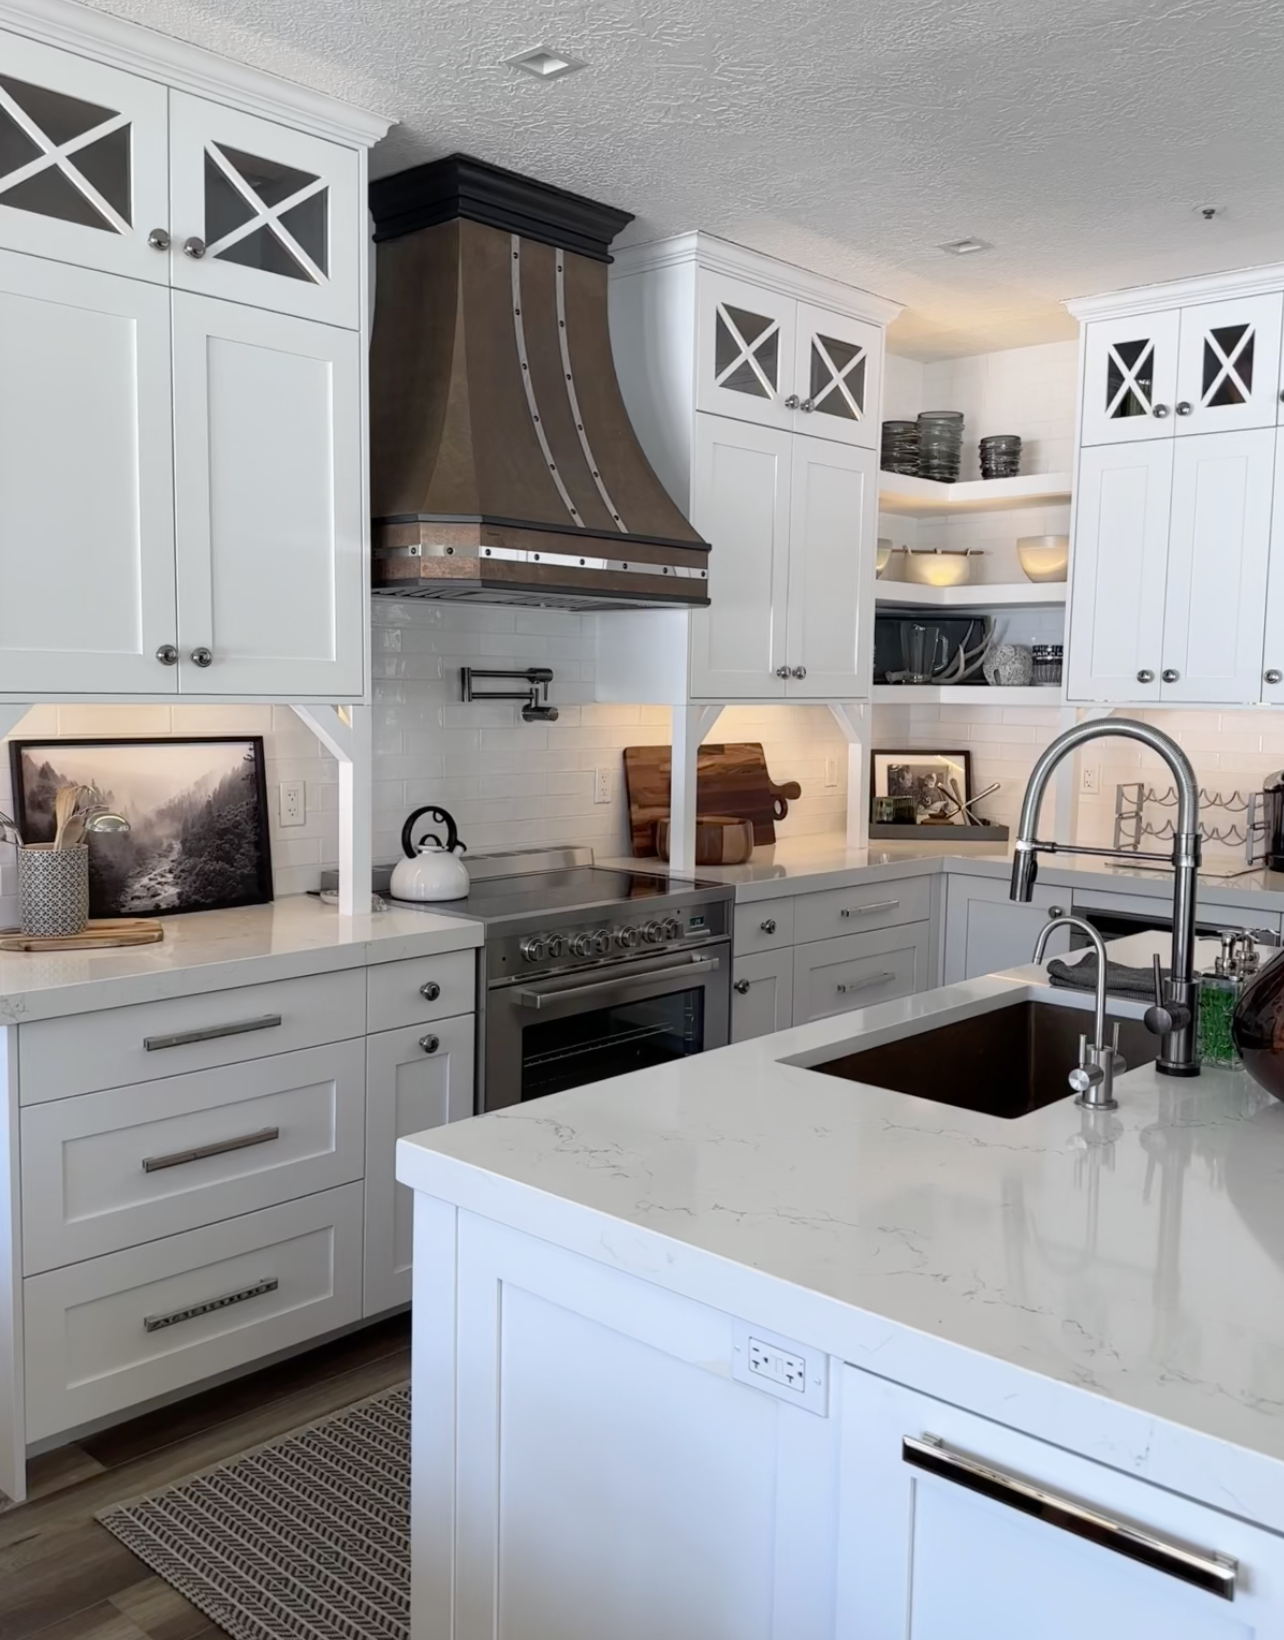 A classic kitchen design idea featuring white kitchen cabinets, white kitchen countertops, brick backsplash complemented by a copper range hood